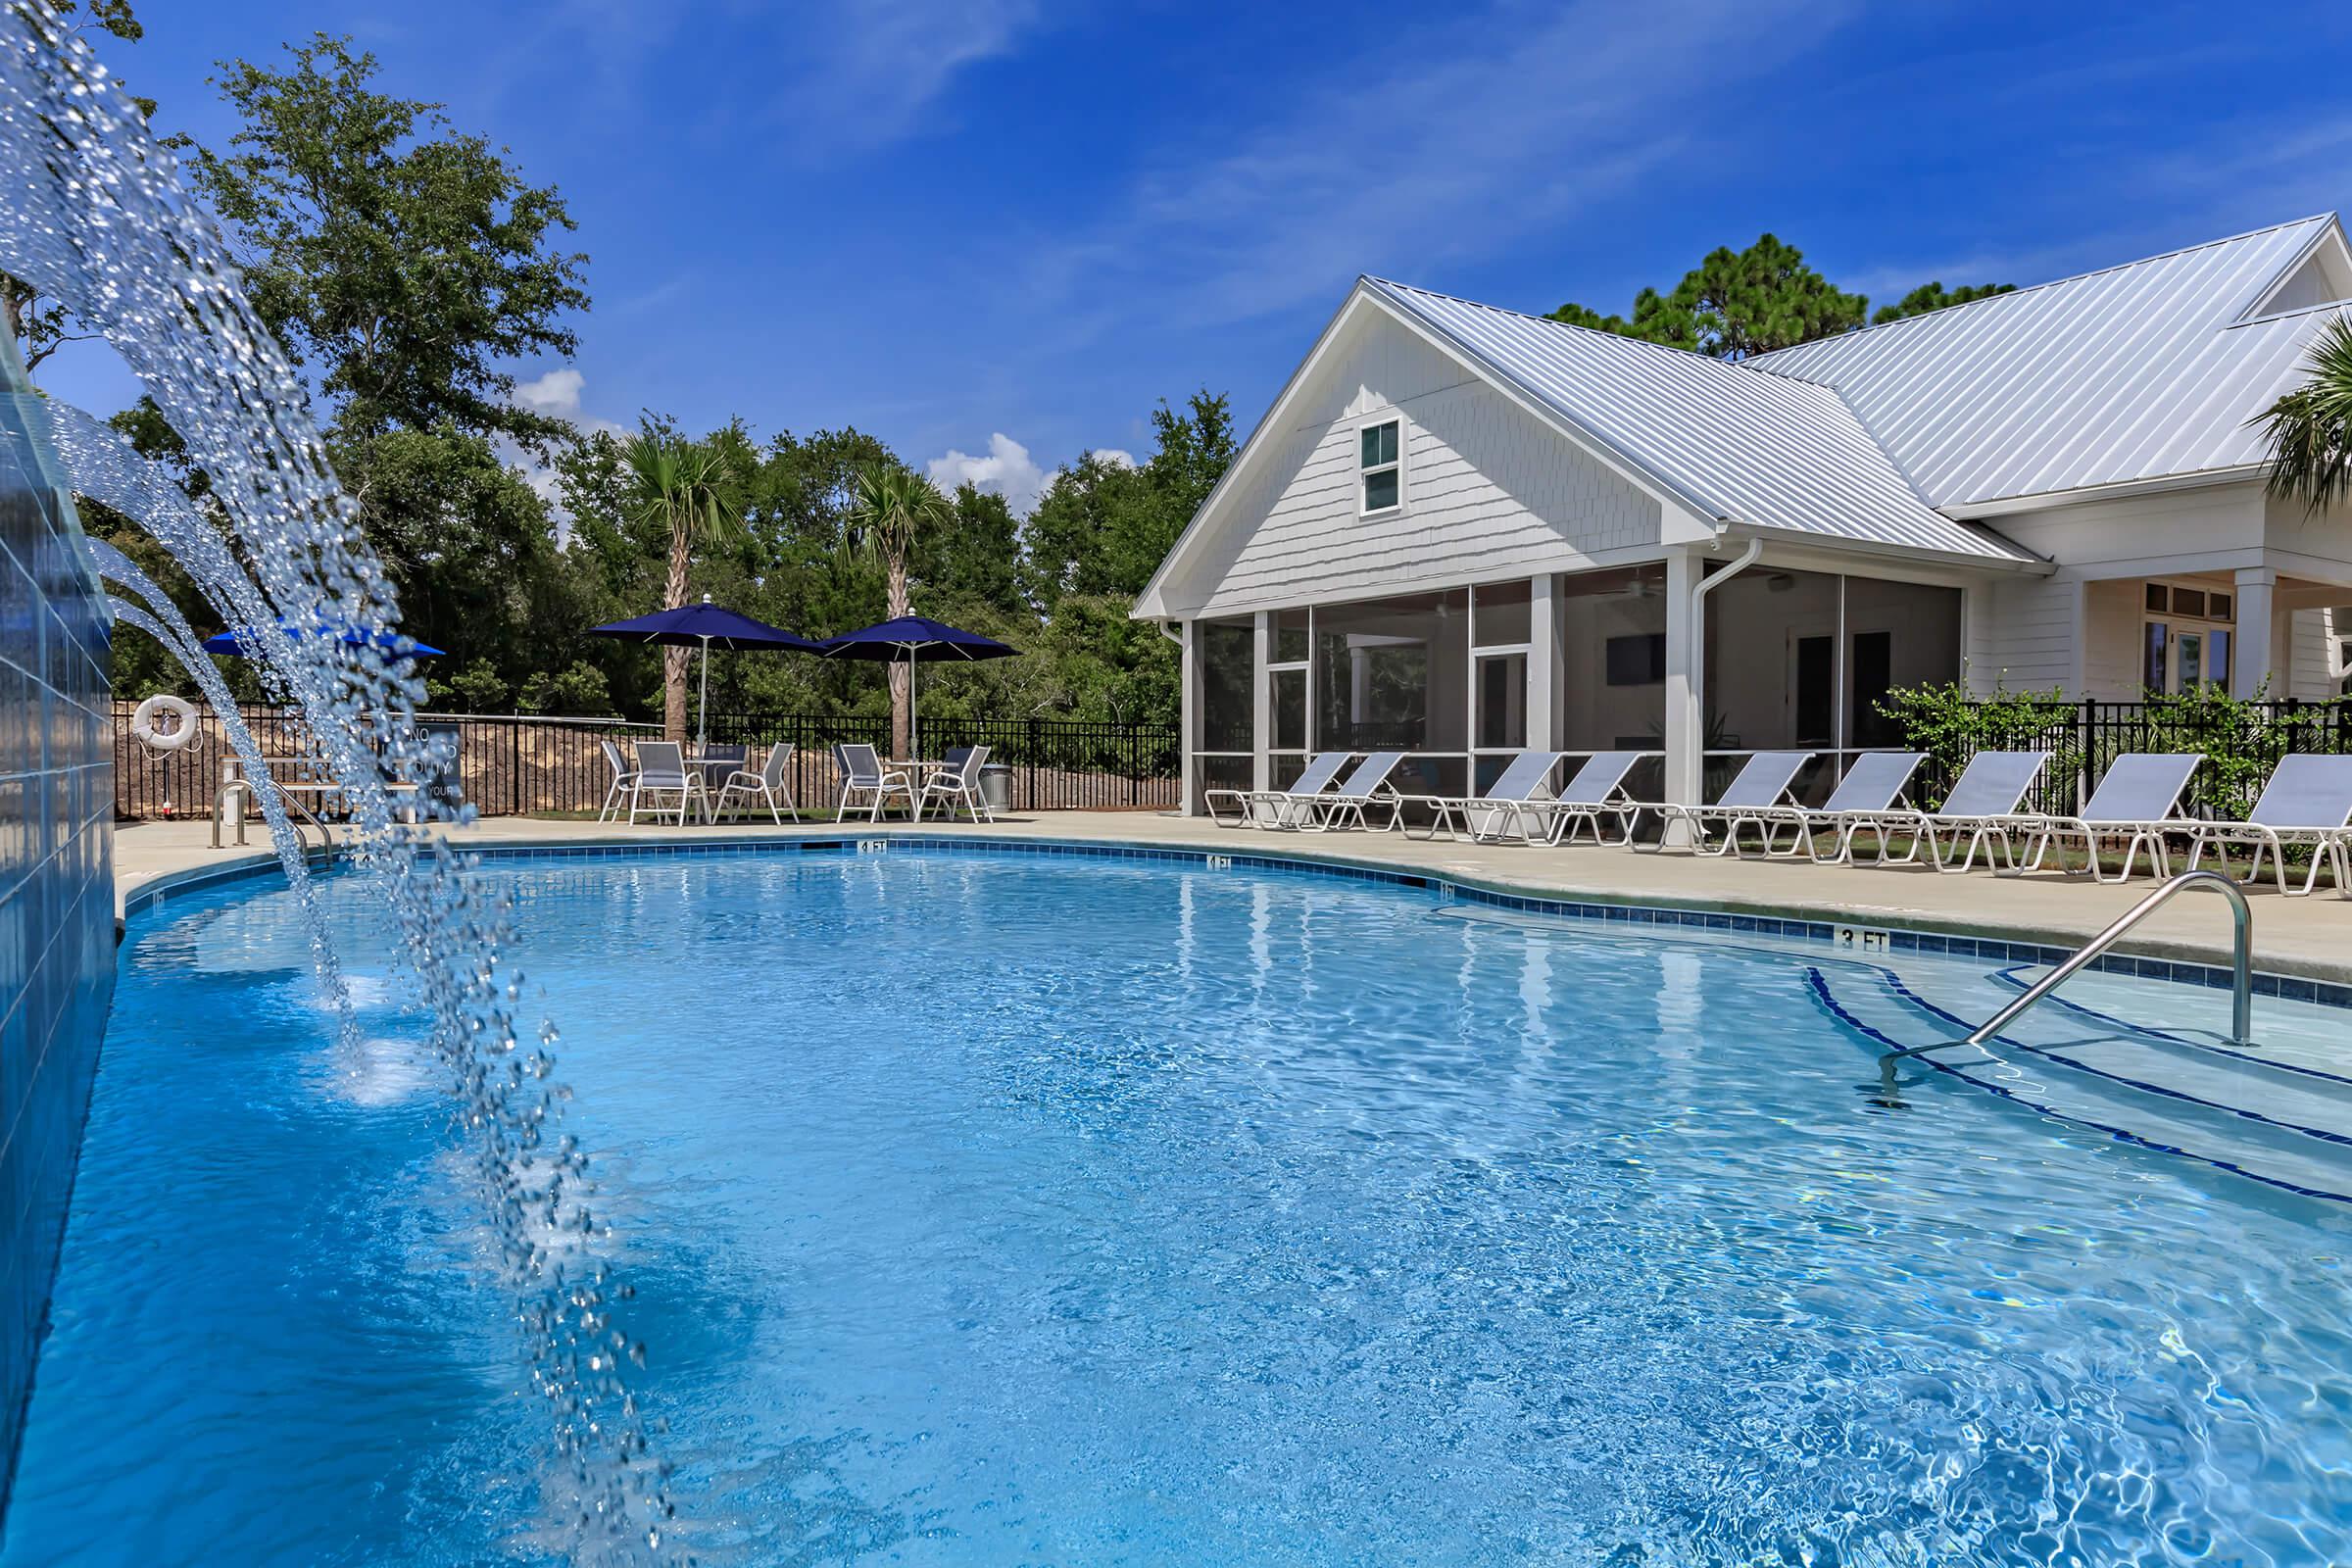 Saltwater swimming pool with waterfall at The Townhomes at Beau Rivage in Wilmington, NC.